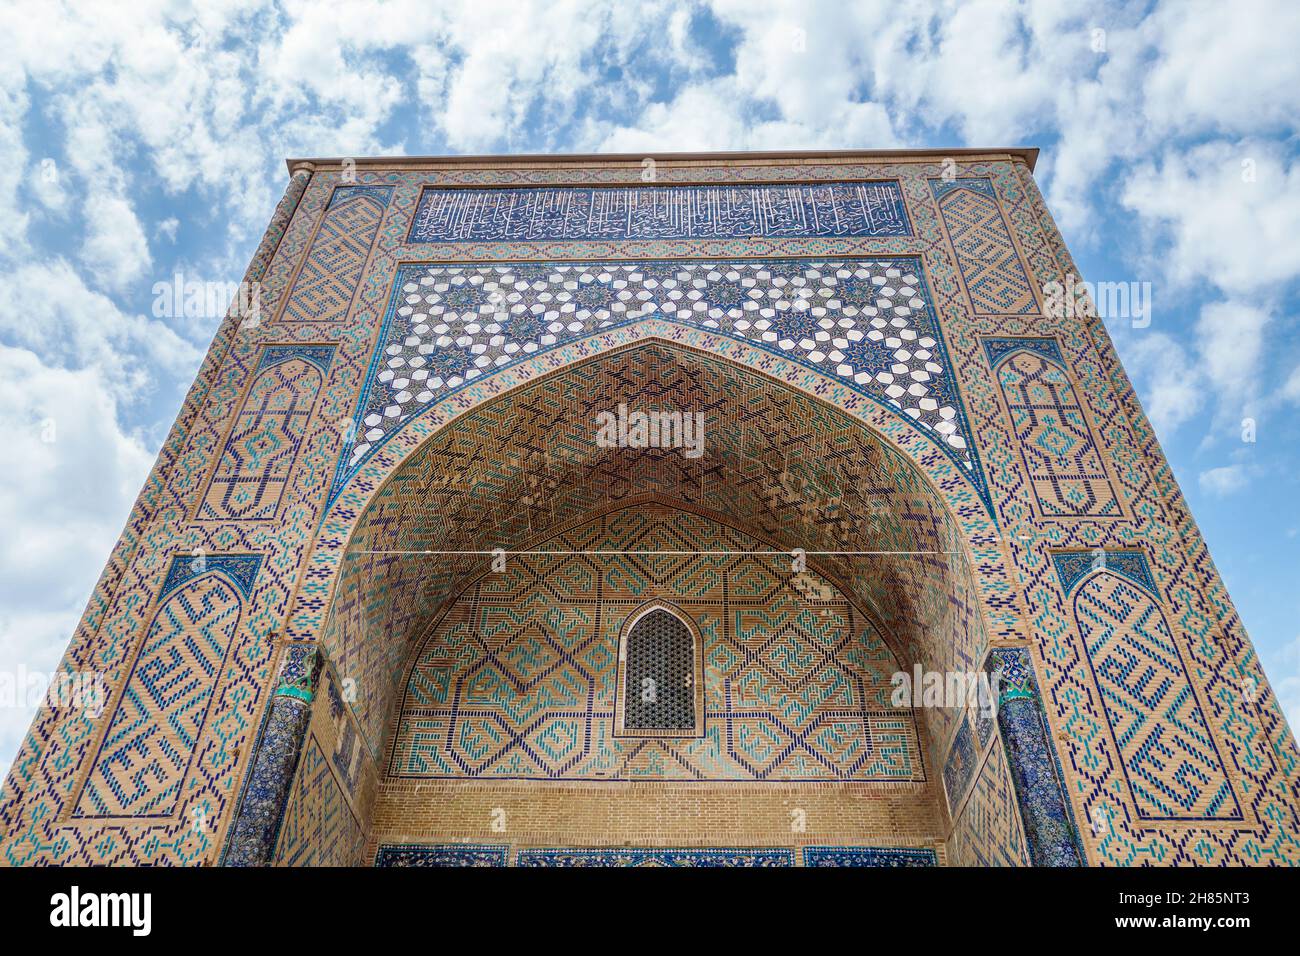 Portal of Kok-Gumbaz mosque or Blue Dome in translation, Shakhrisabz, Uzbekistan. Traditional ornaments decorate the building from top to bottom Stock Photo